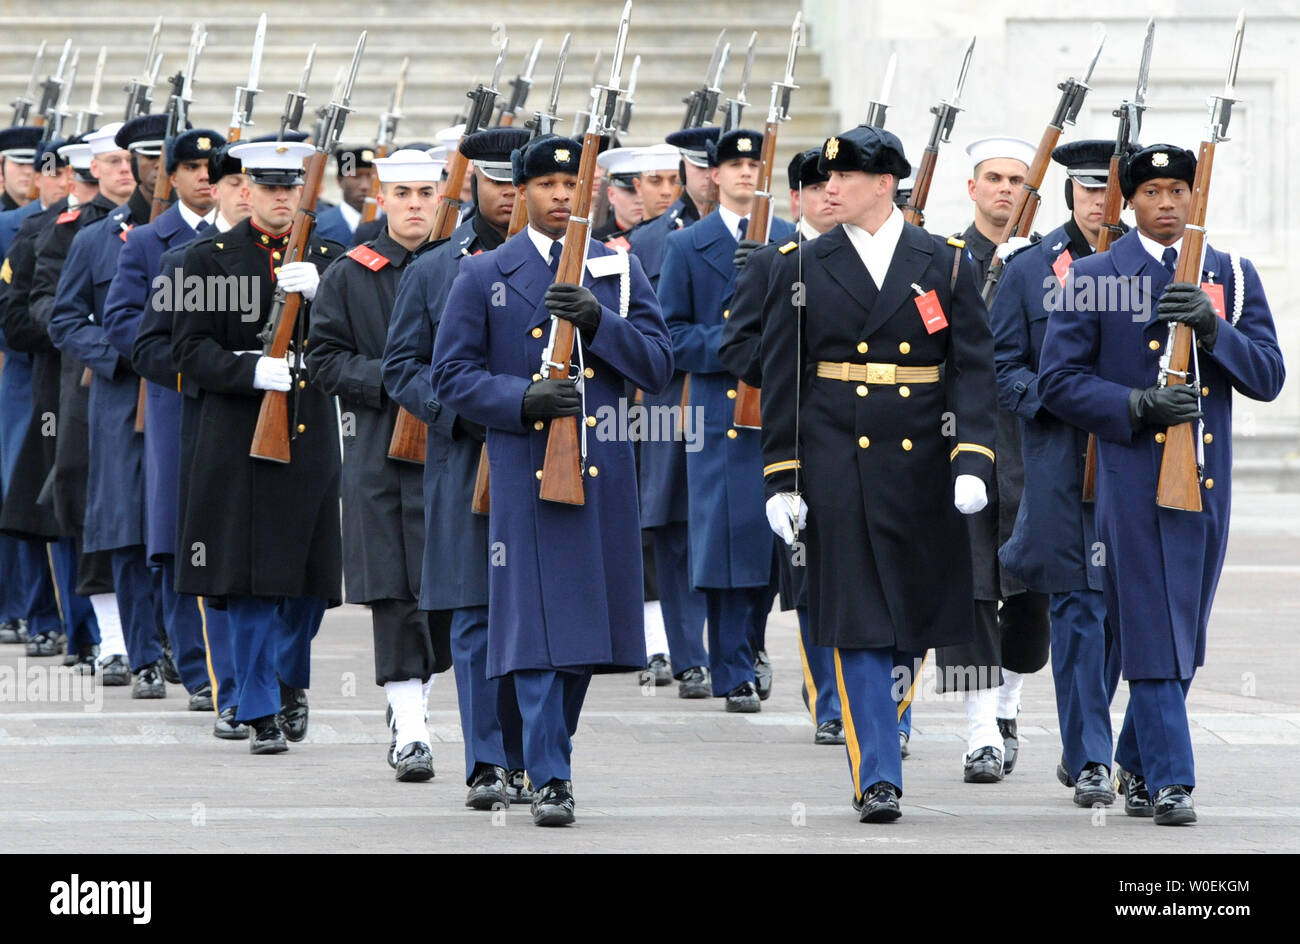 U.S. military honor guards march to precision during a dress rehearsal of the Presidential Inauguration ceremony at the U.S. Capitol on January 11, 2009.  President-elect Barack Obama will take the oath of office and become the 44th president of the United States on January 20, 2009.  Millions are expected in Washington for the event.  (UPI Photo/Pat Benic) Stock Photo